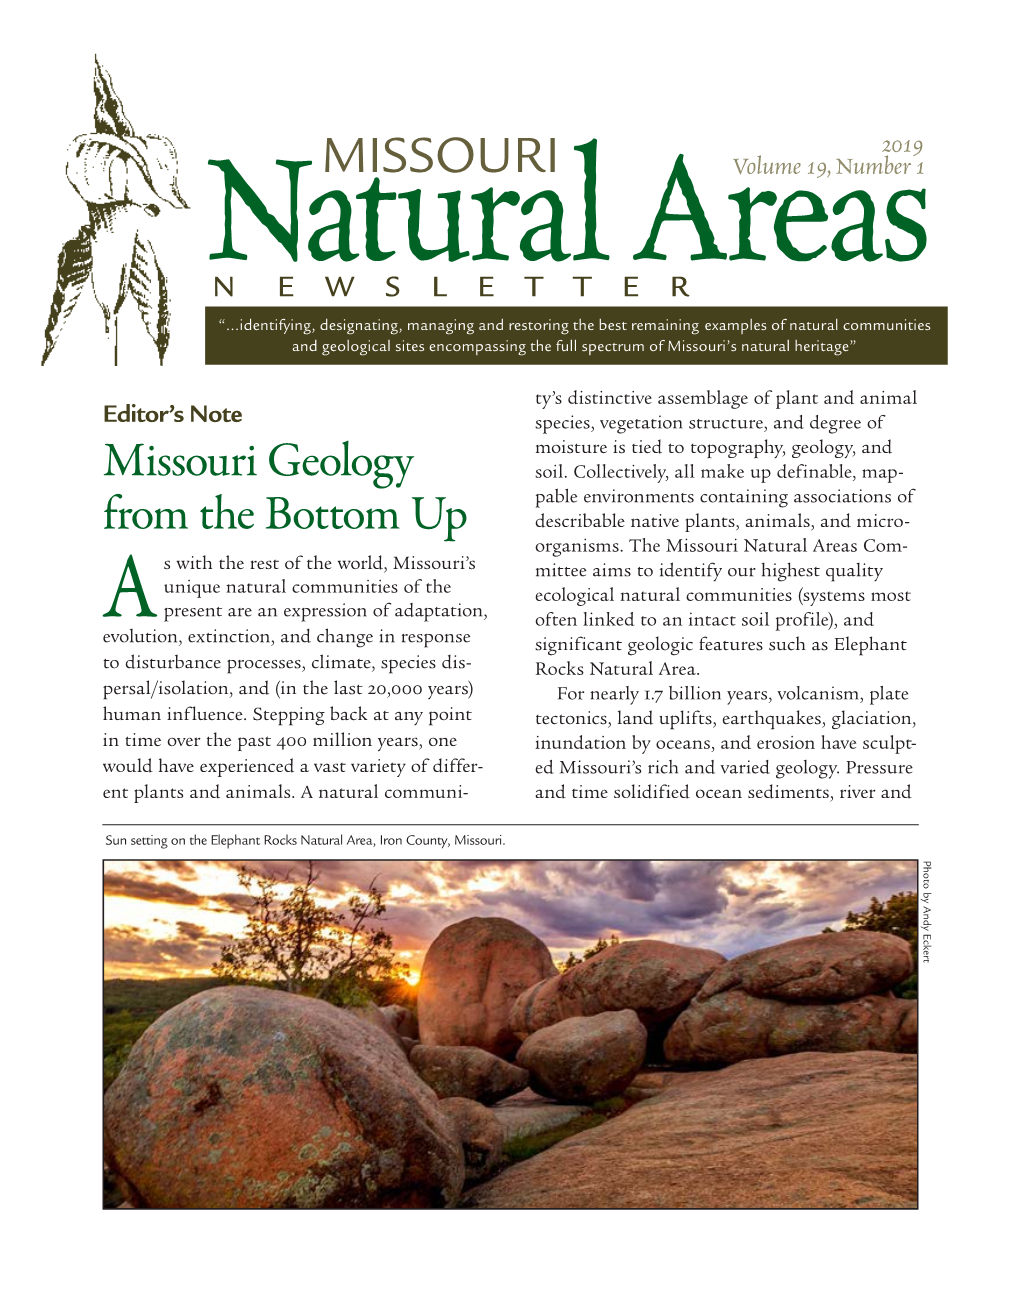 Natural Area Newsletter 2019